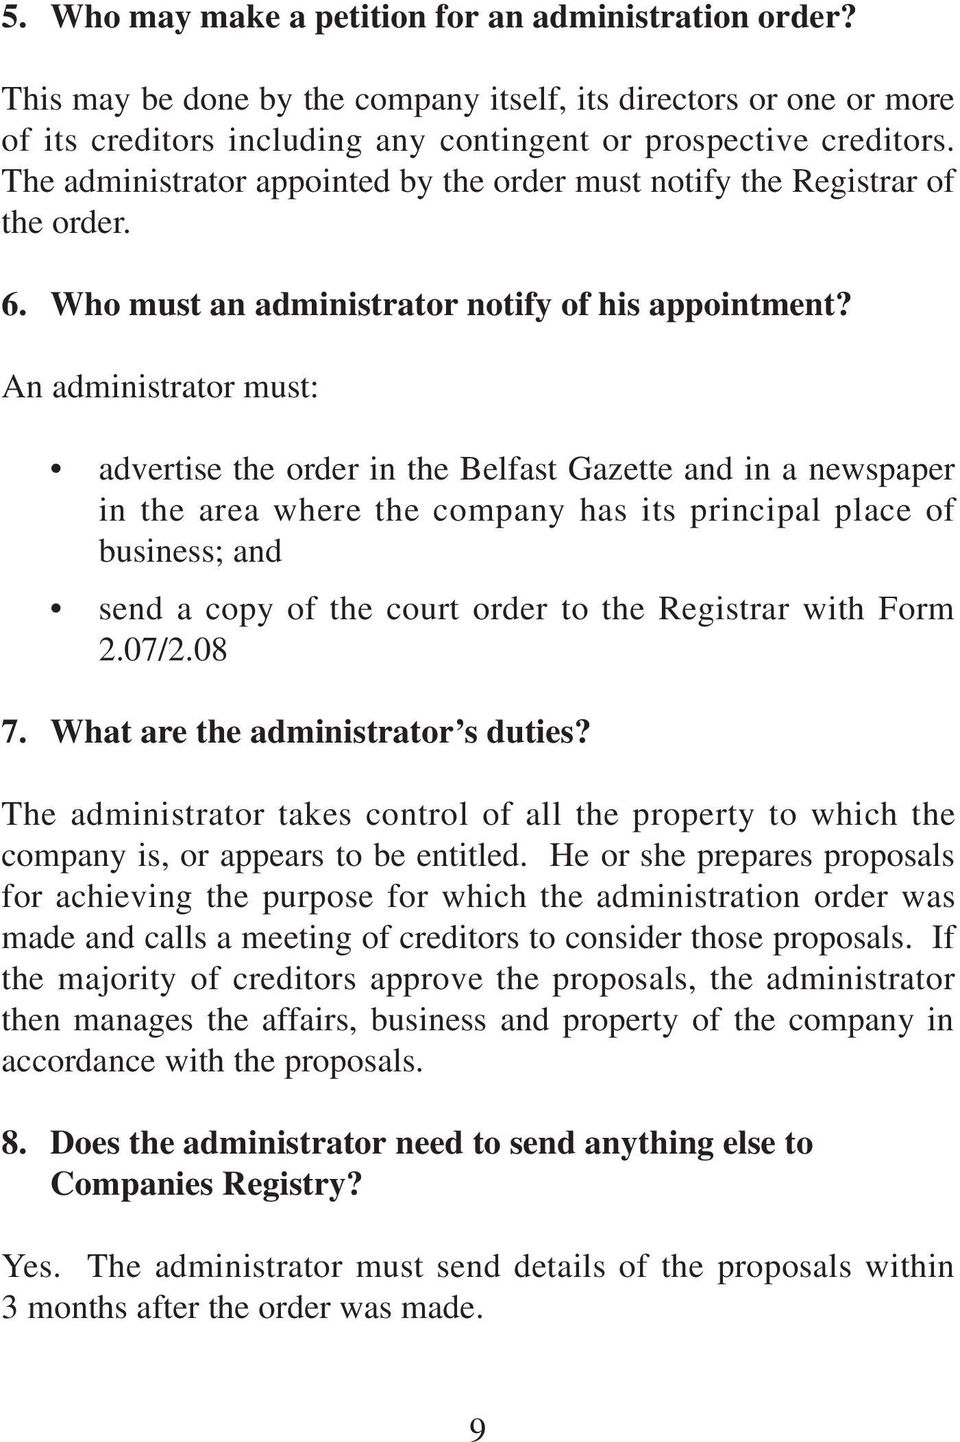 An administrator must: advertise the order in the Belfast Gazette and in a newspaper in the area where the company has its principal place of business; and send a copy of the court order to the